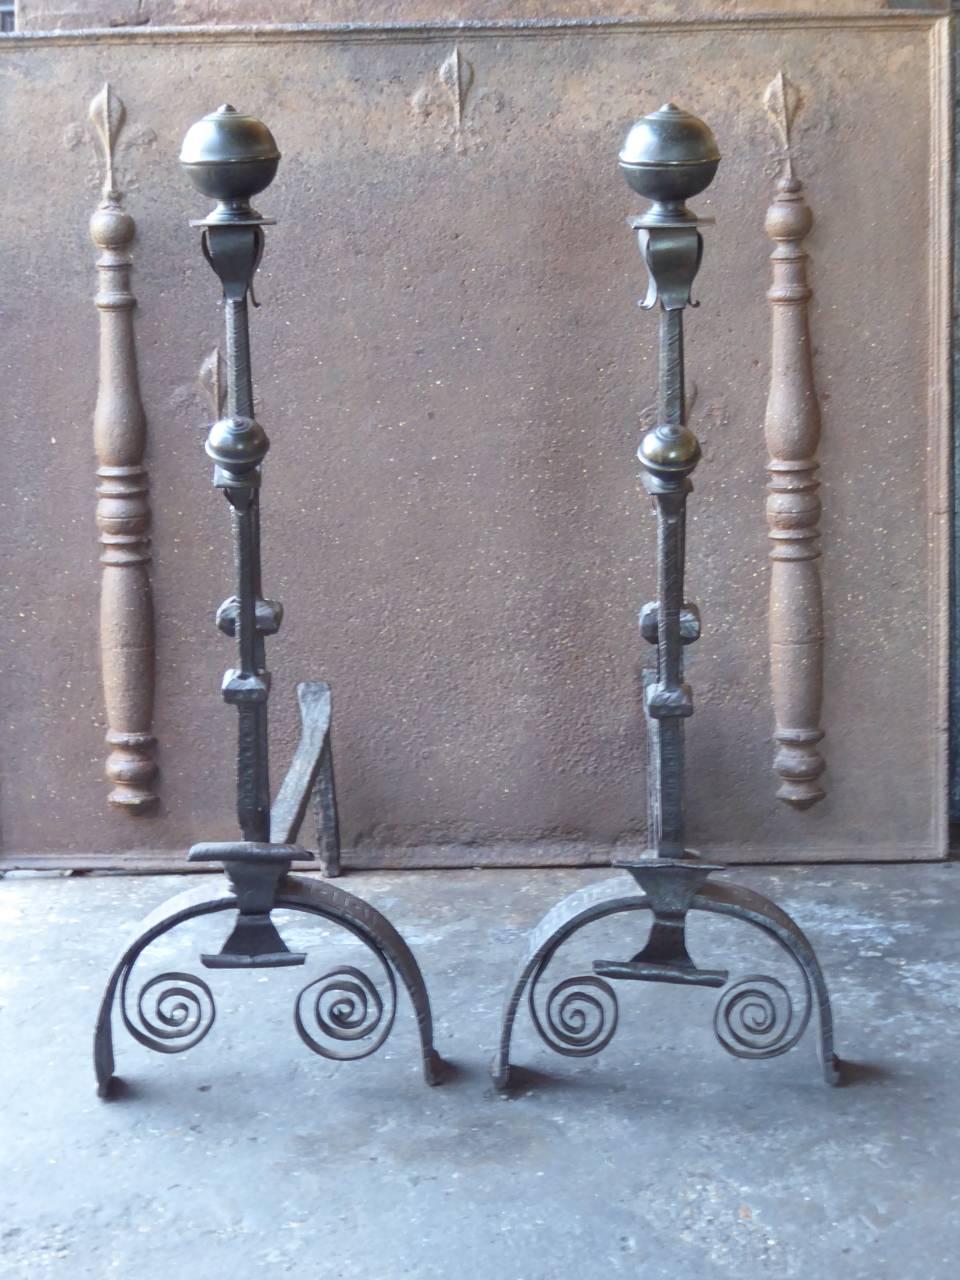 Magnificent 16th century Italian Renaissance andirons made of bronze and wrought iron.

We have a unique and specialized collection of antique and used fireplace accessories consisting of more than 1000 listings at 1stdibs. Amongst others, we always